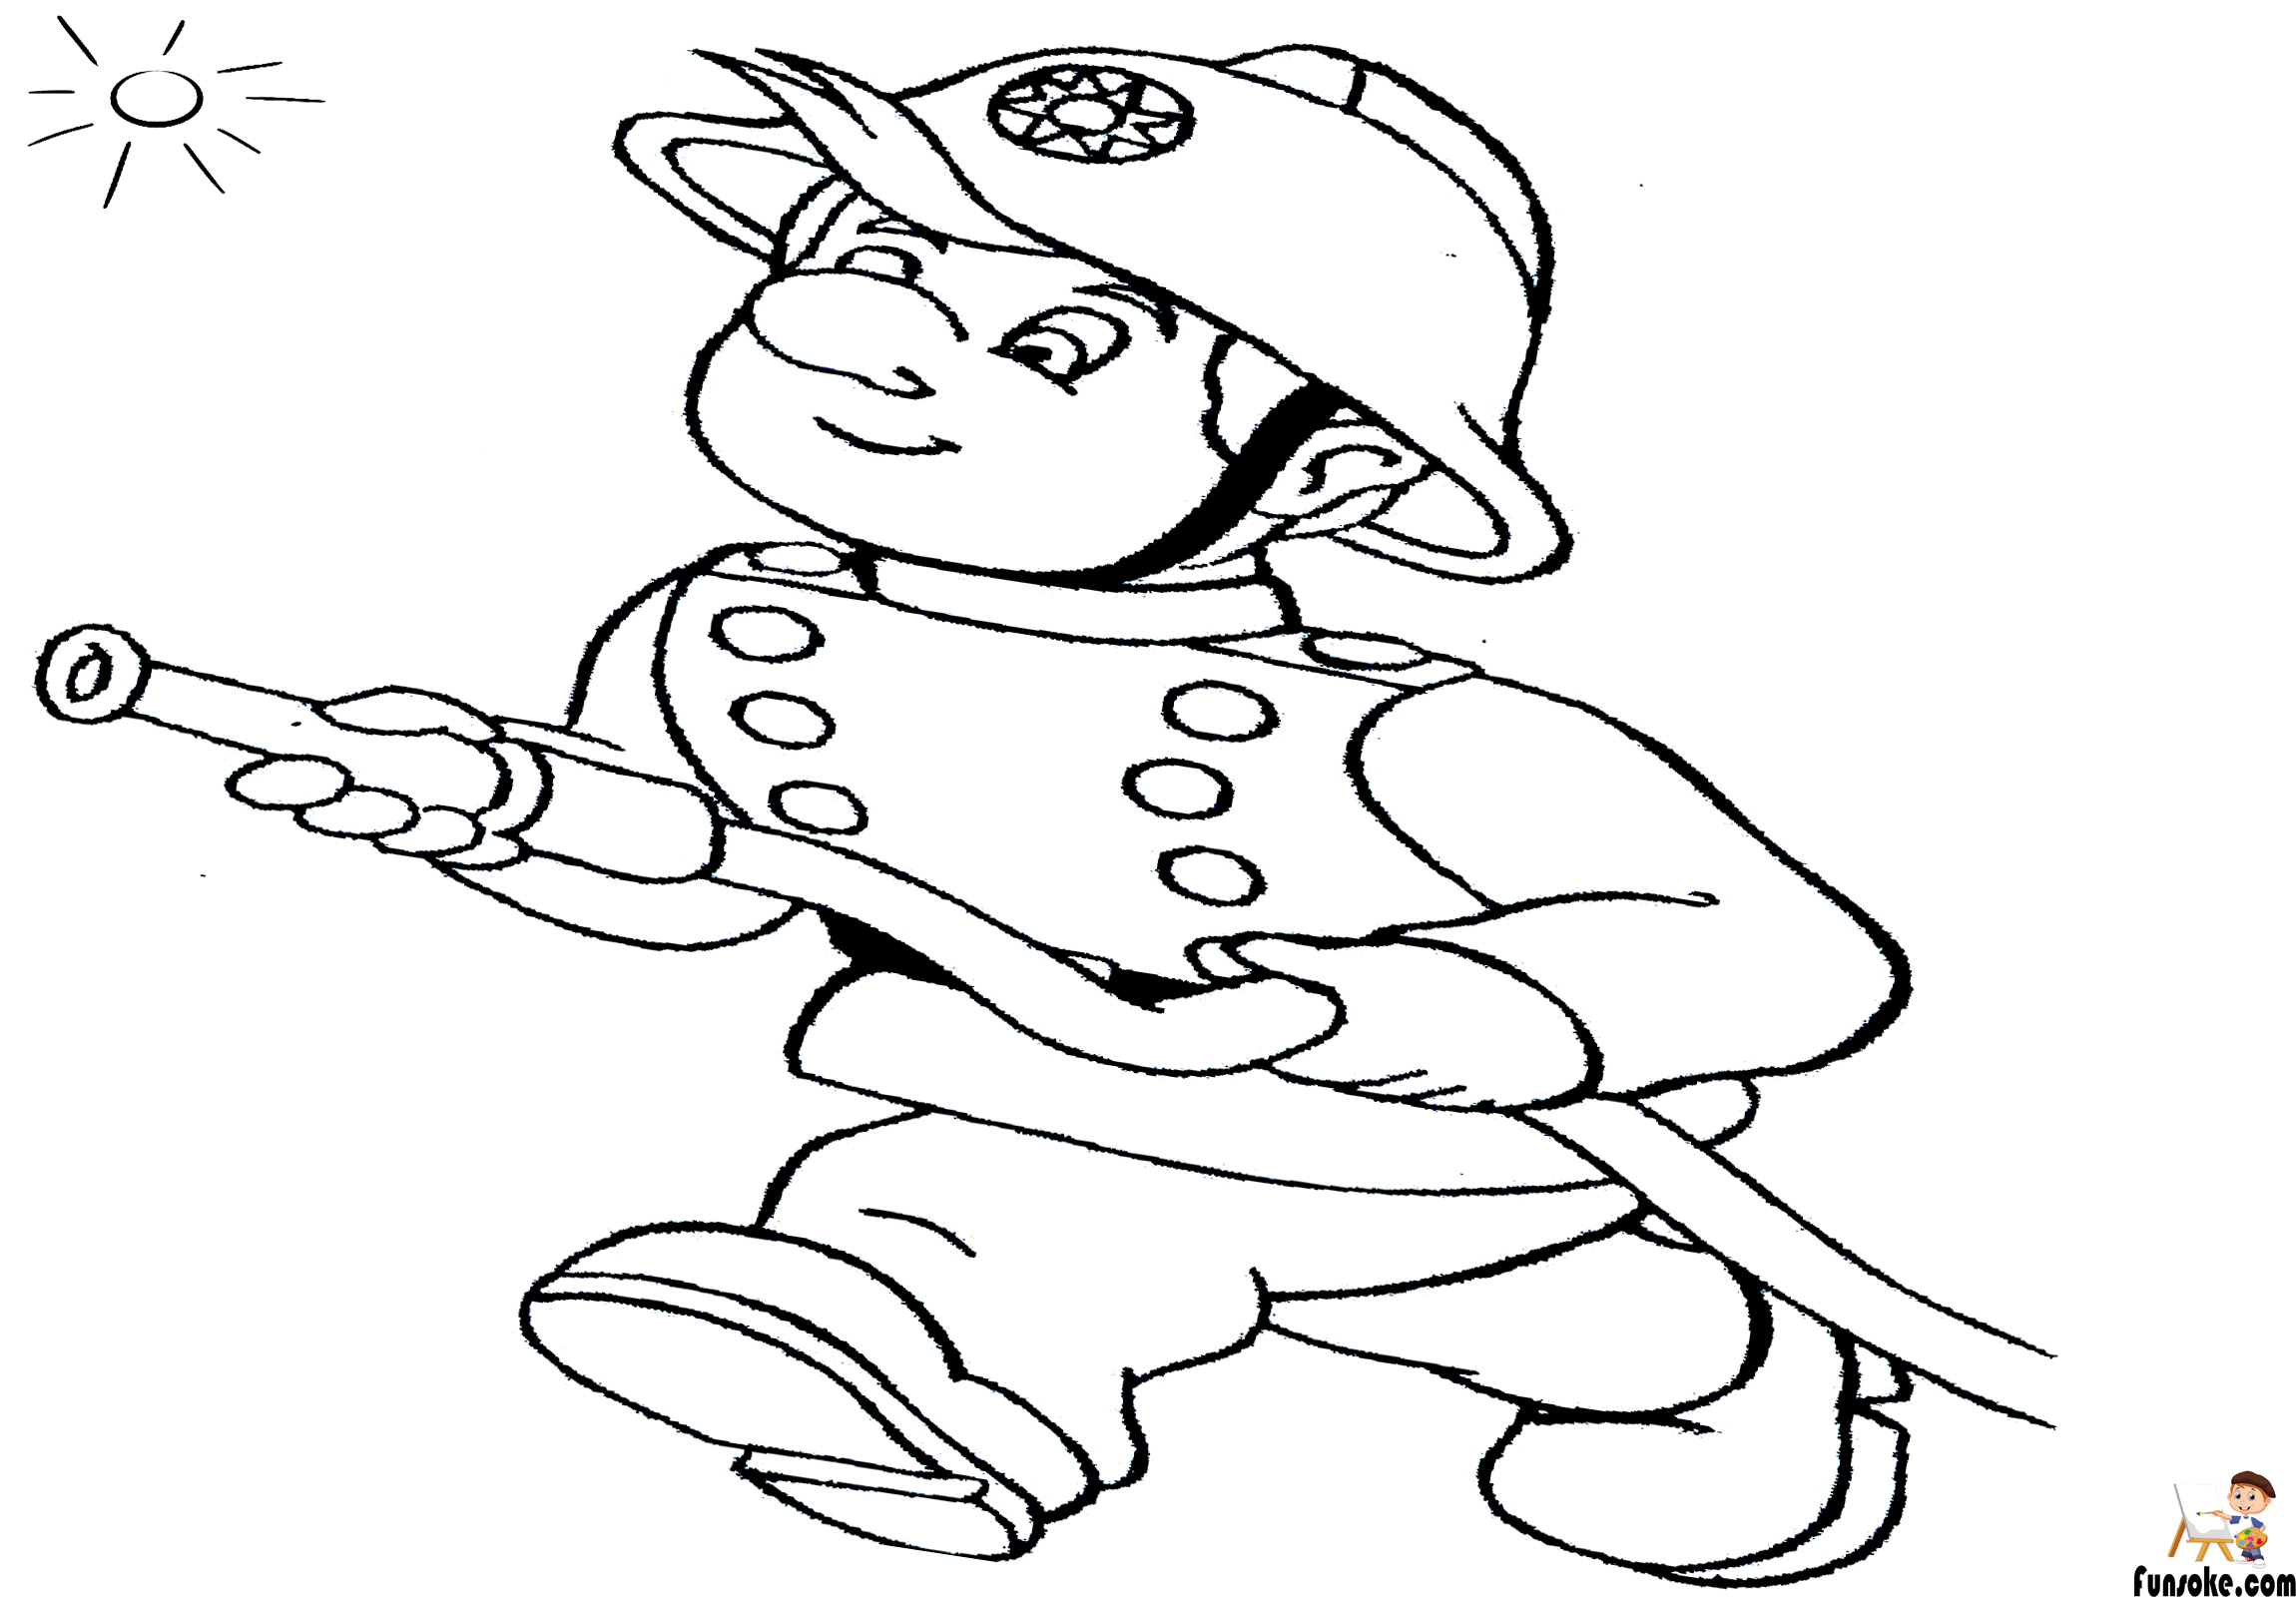 firefighter coloring pages for preschoolers - Funsoke